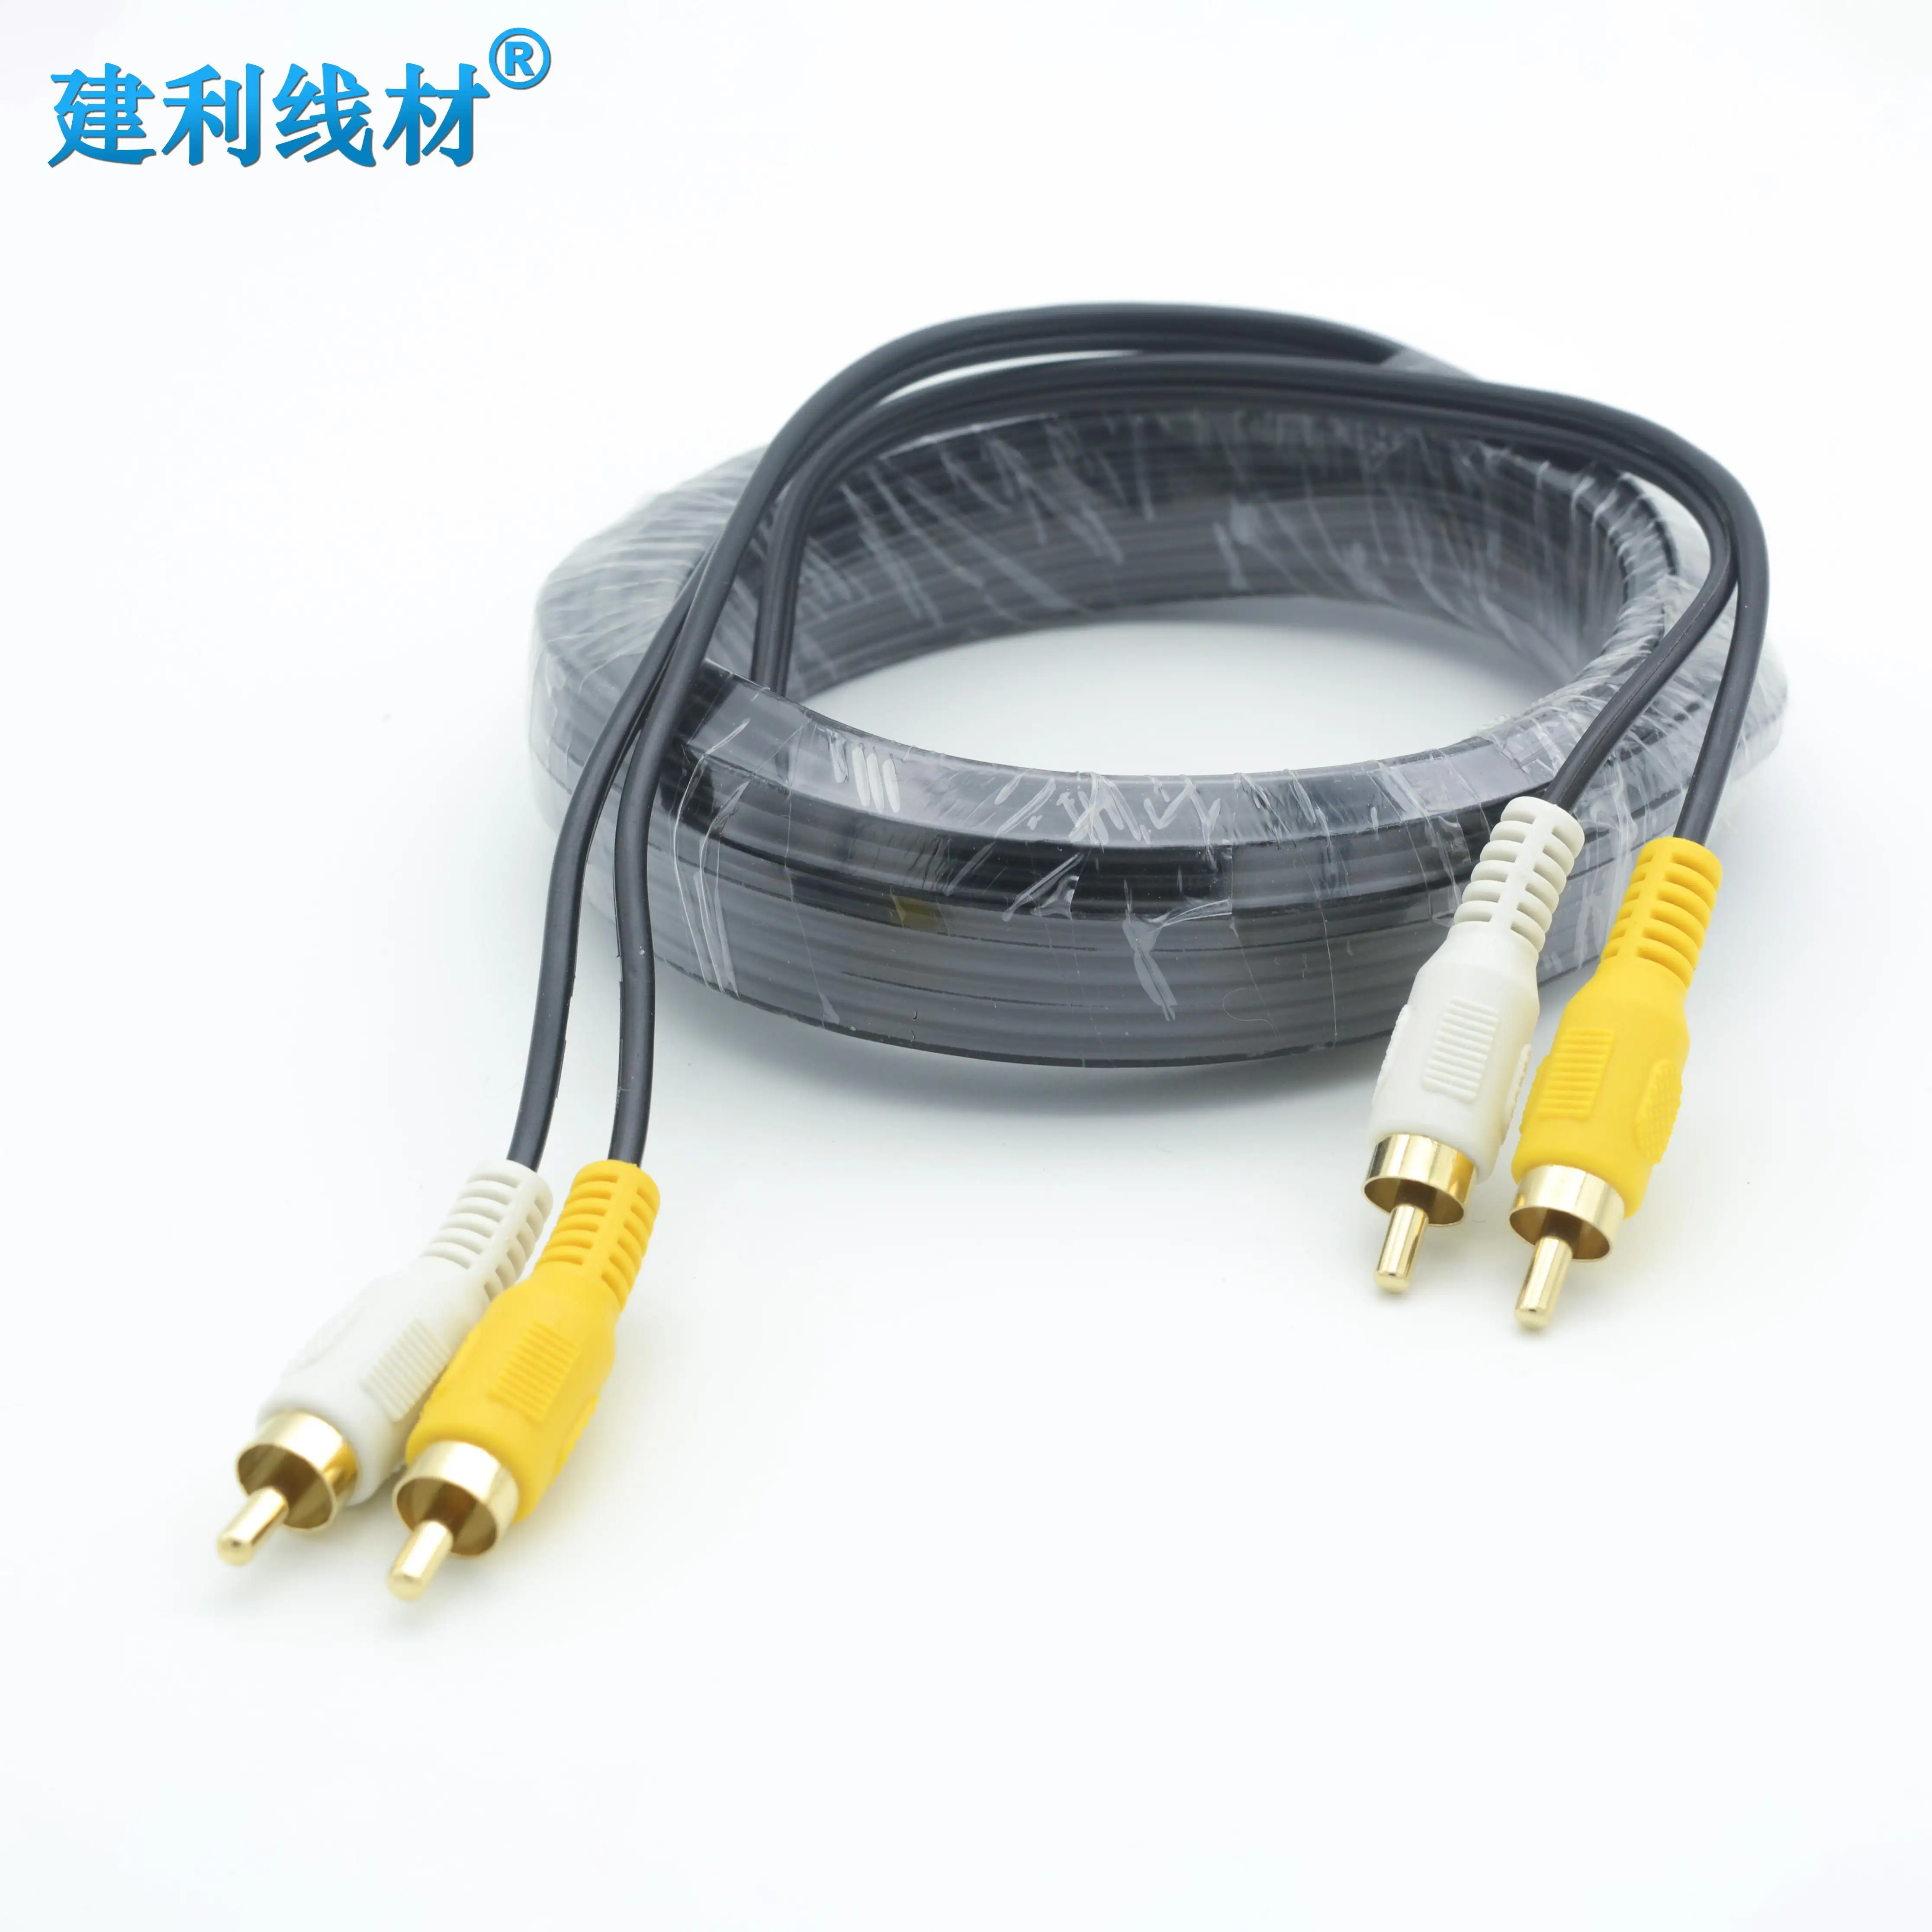 RCA Audio Video Male-to-Male Extension Cable  Suitable for Vehicle Monitoring Systems  CCTV Systems  and video-audio cable